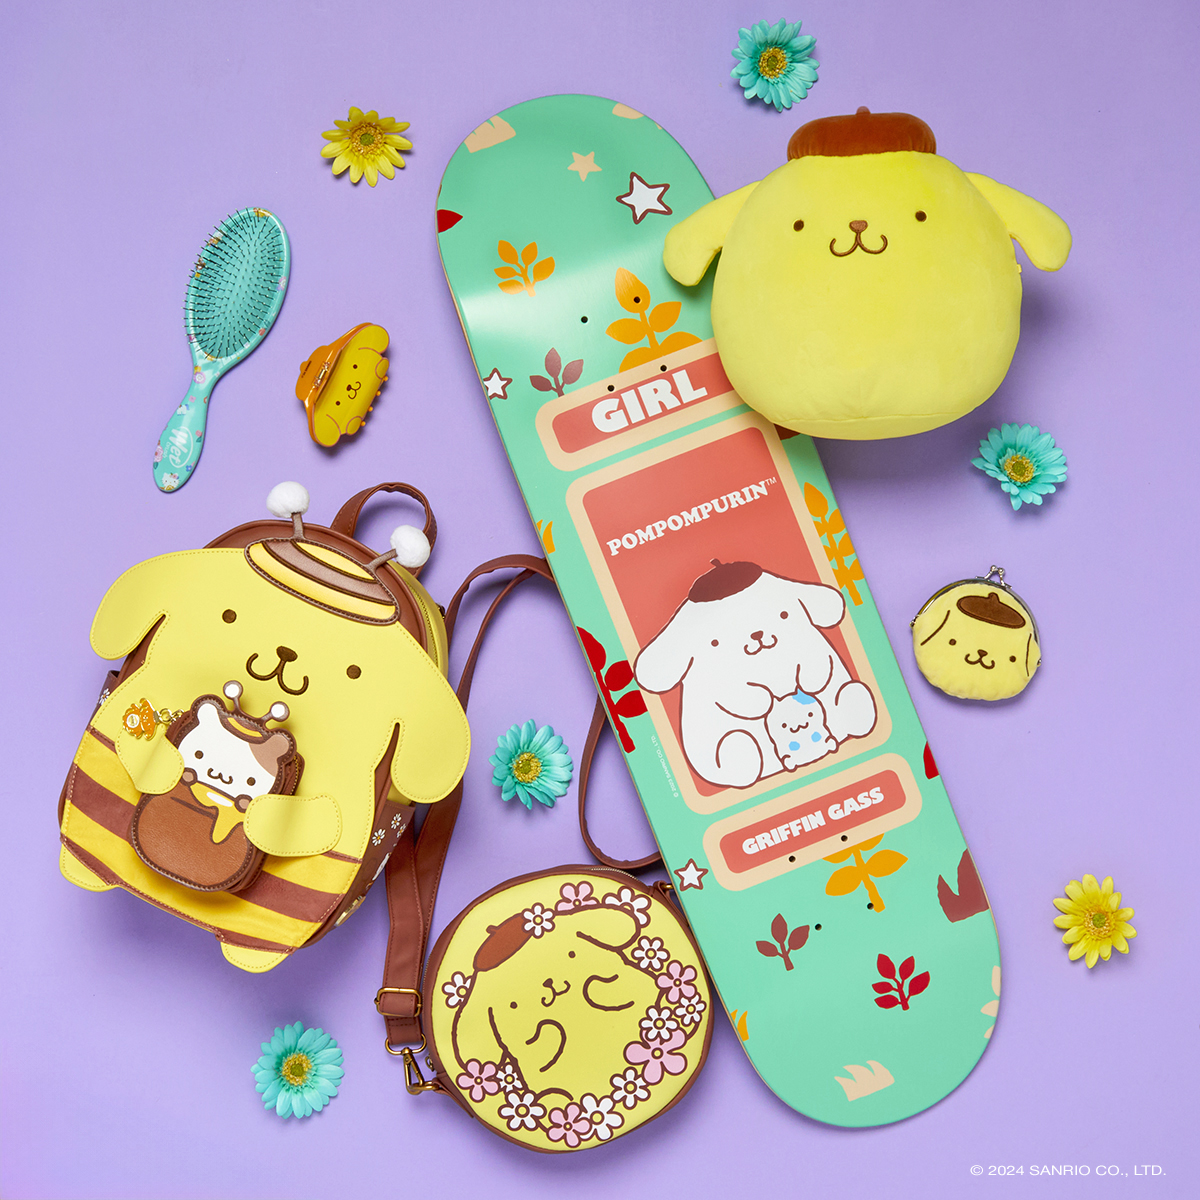 💛 GIVEAWAY 💛 We're celebrating our Friend of the Month with a super sweet giveaway! Want to win this adorable #Pompompurin prize pack? Follow @sanrio on IG to enter!